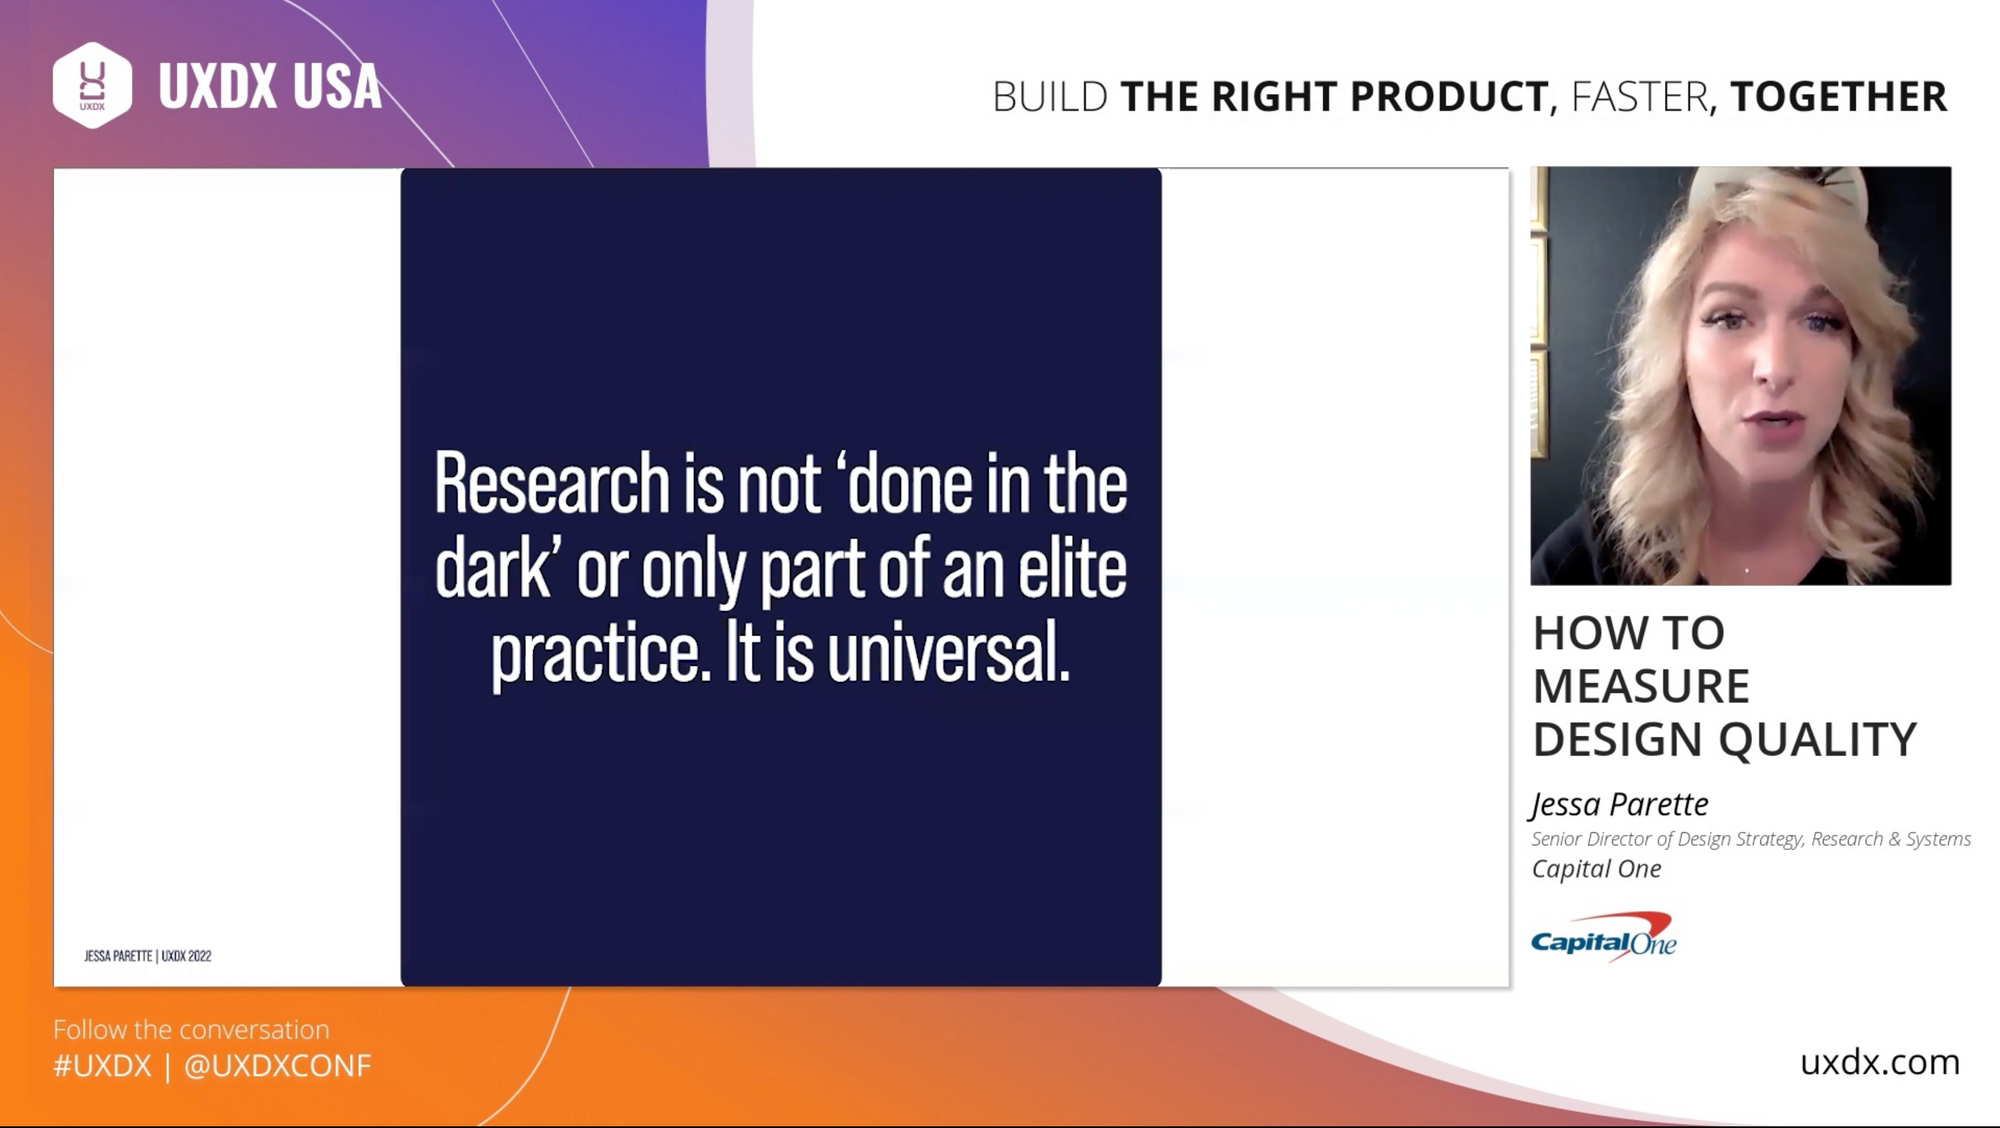 Jessa Parette presenting a quote: Research is not 'done in the dark' or only part of an elite practice. It is universal.